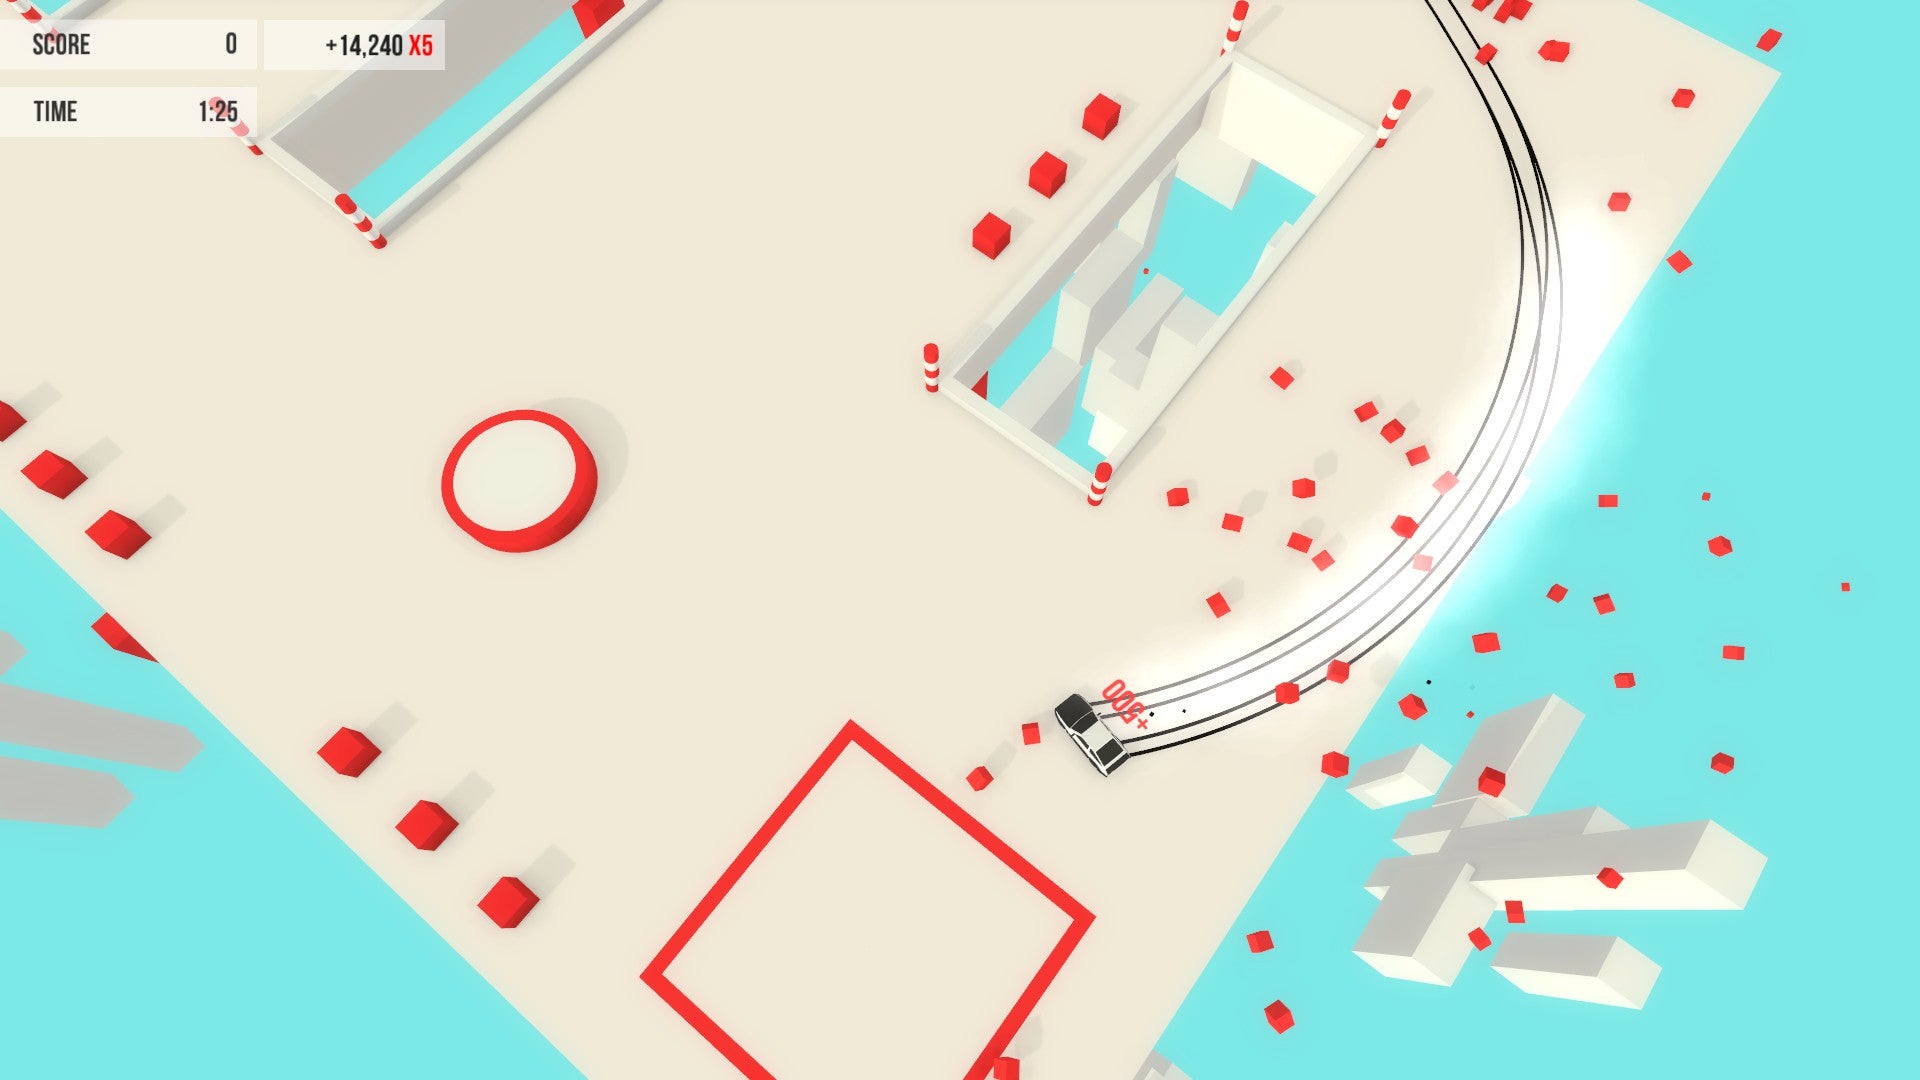 Absolute Drift - A car drifts around a hole in the floor of a pastel colored level with red obstacles.